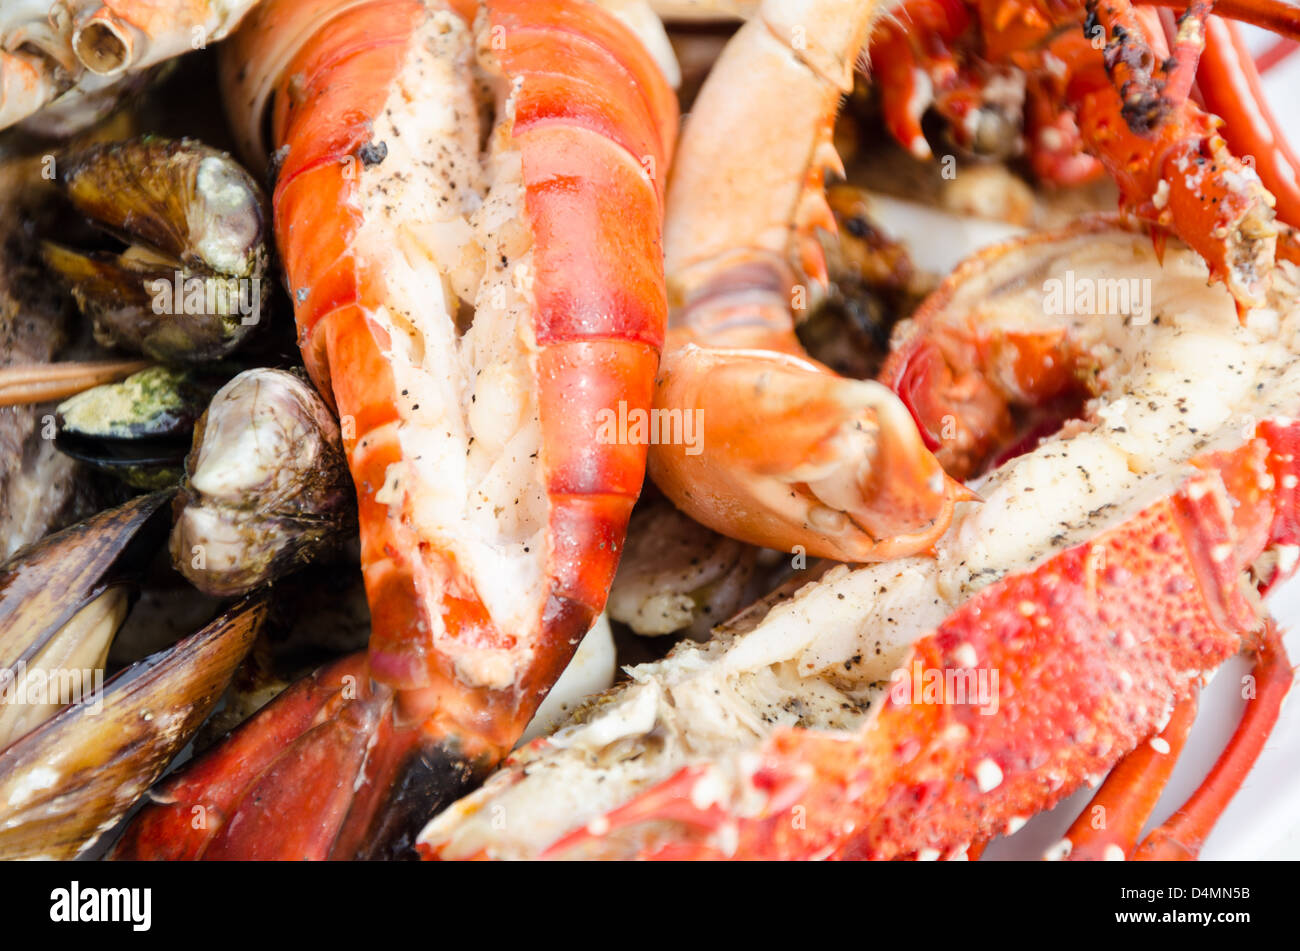 Platter with lobster, mussels, fish and prawns Stock Photo